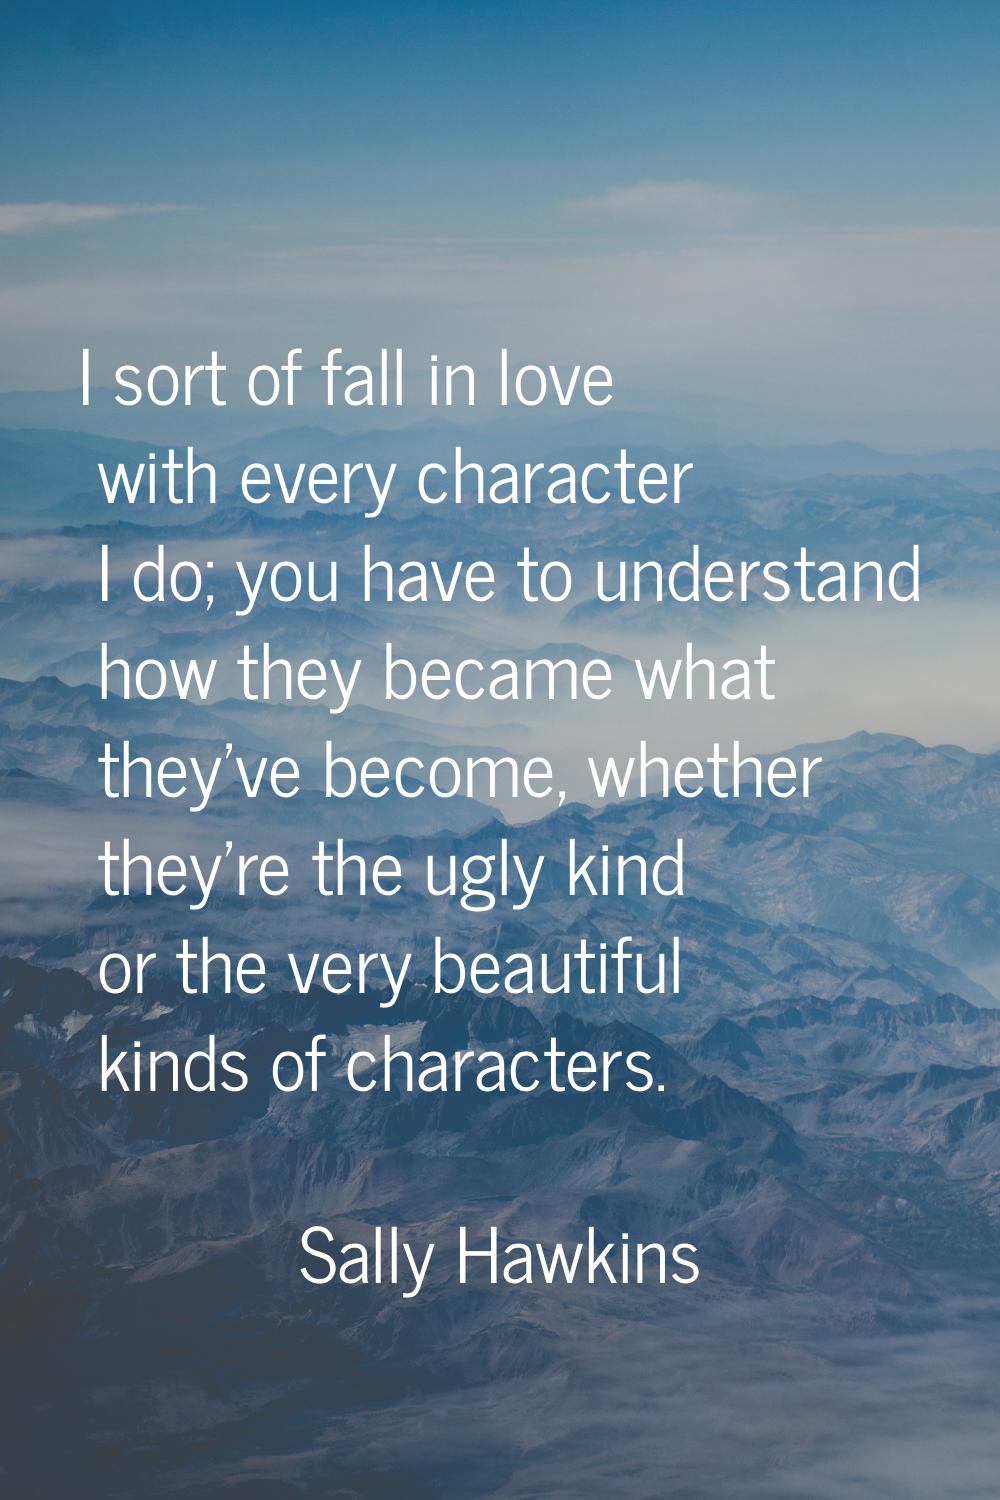 I sort of fall in love with every character I do; you have to understand how they became what they'